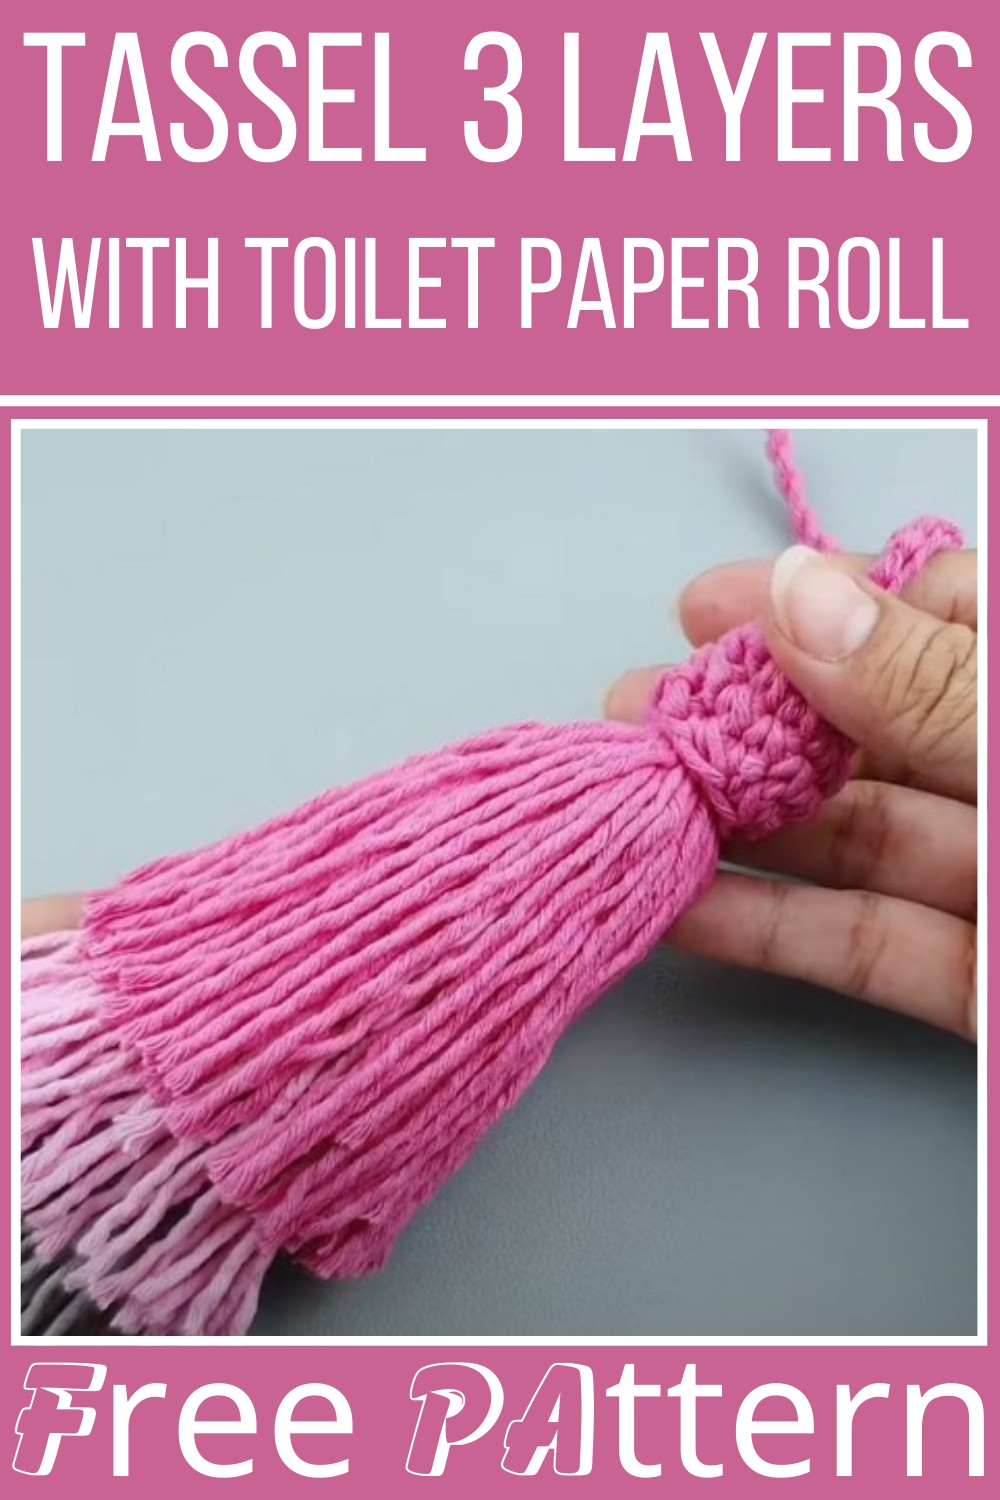 How To Make A Tassel 3 Layers With Toilet Paper Roll